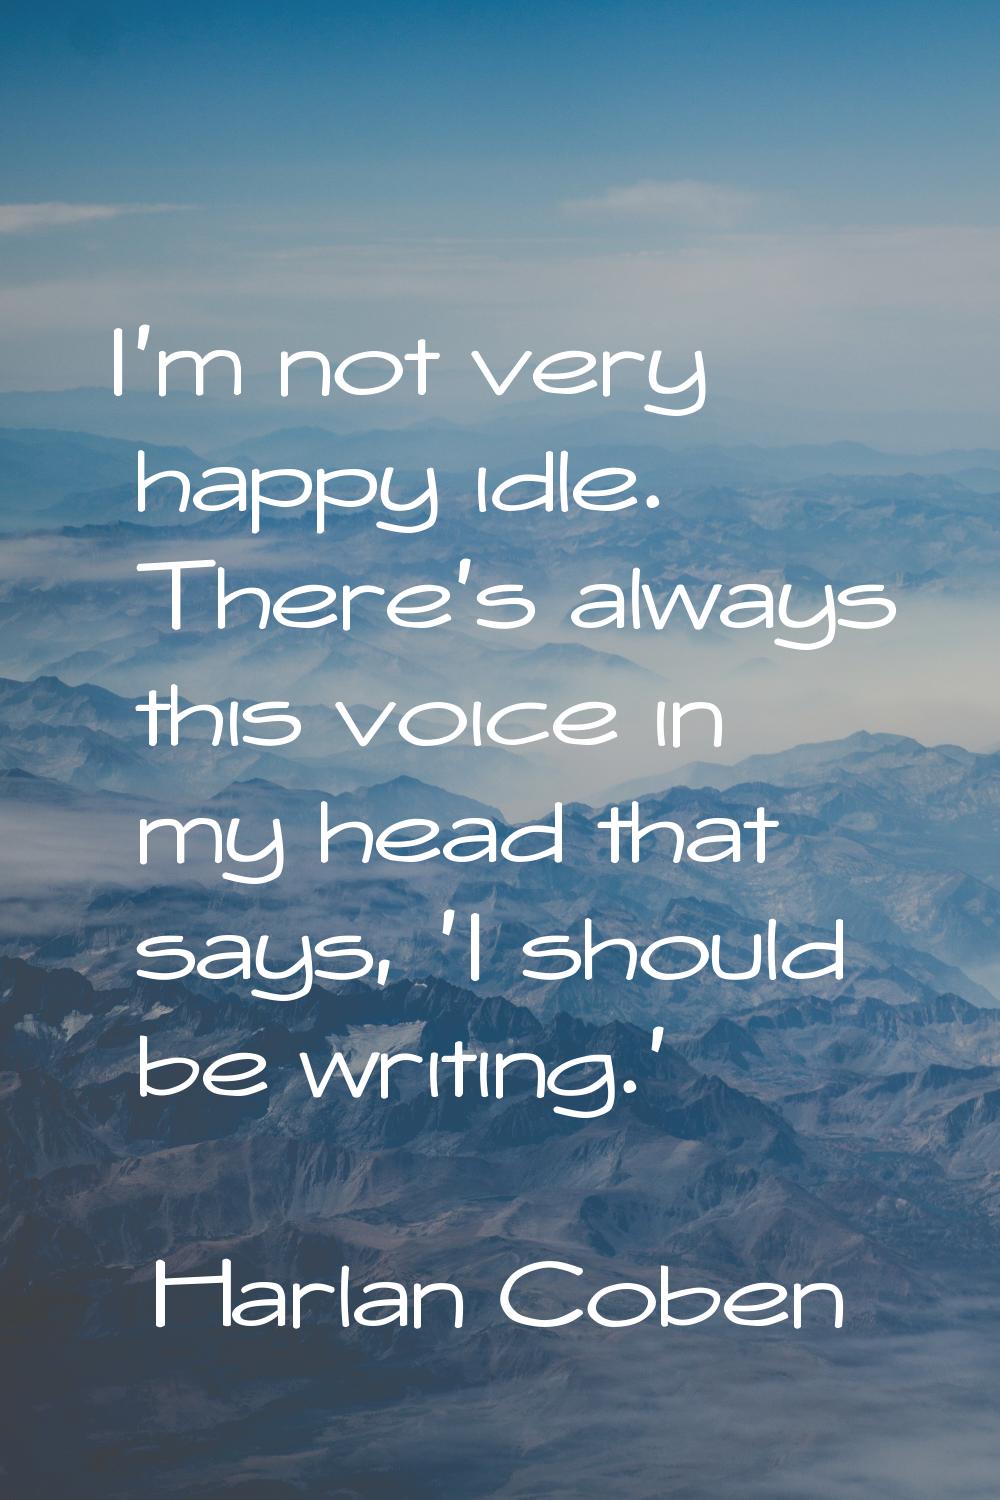 I'm not very happy idle. There's always this voice in my head that says, 'I should be writing.'